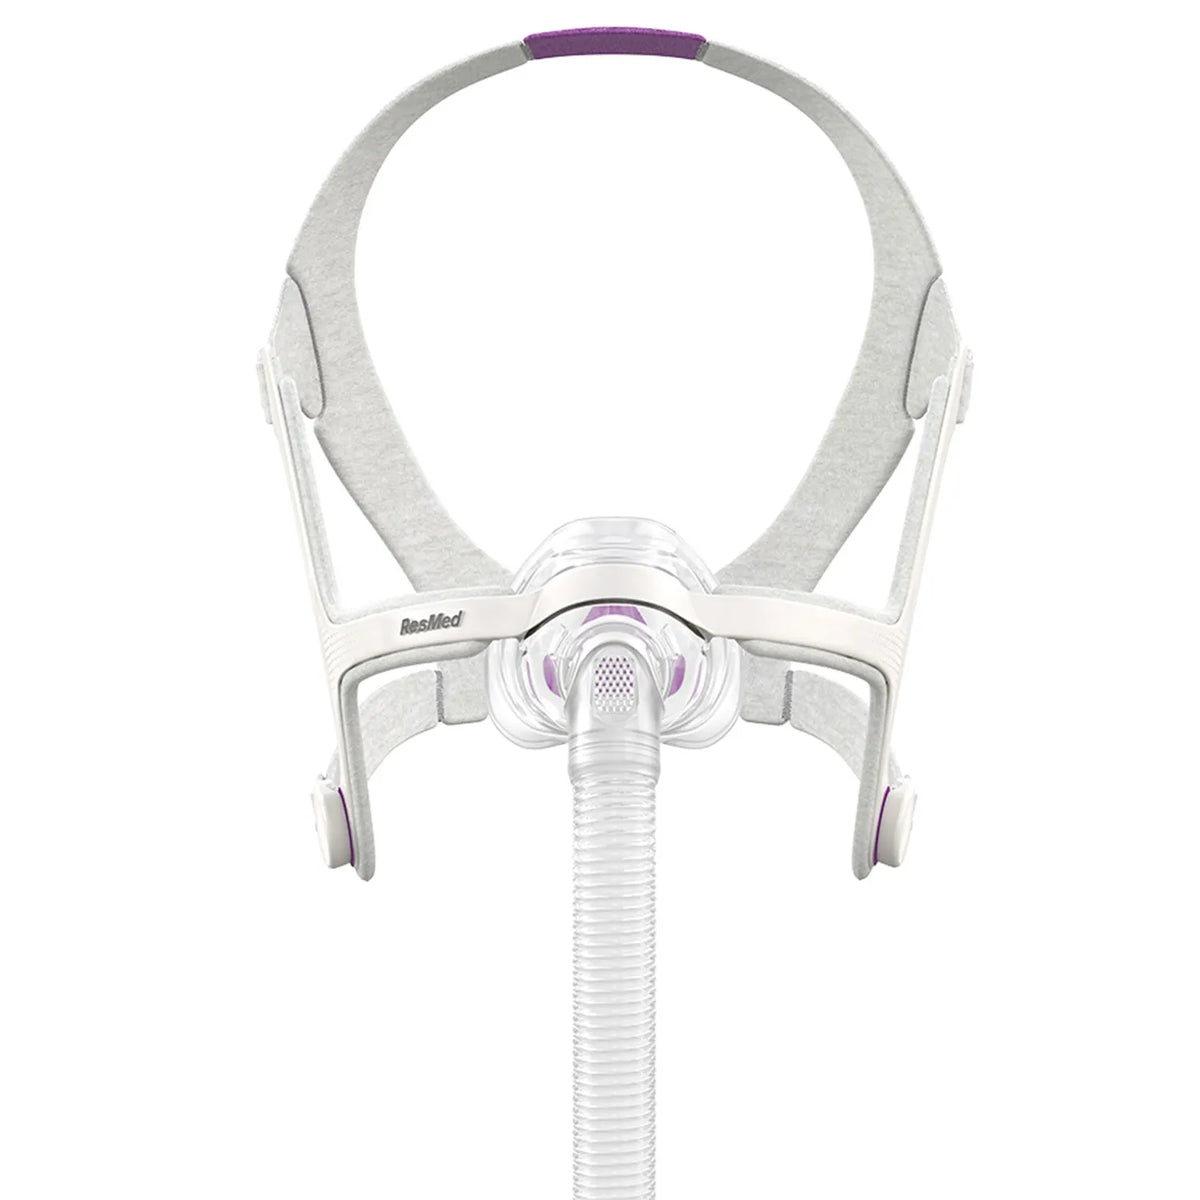 AirFit N20 for Her Complete Mask System